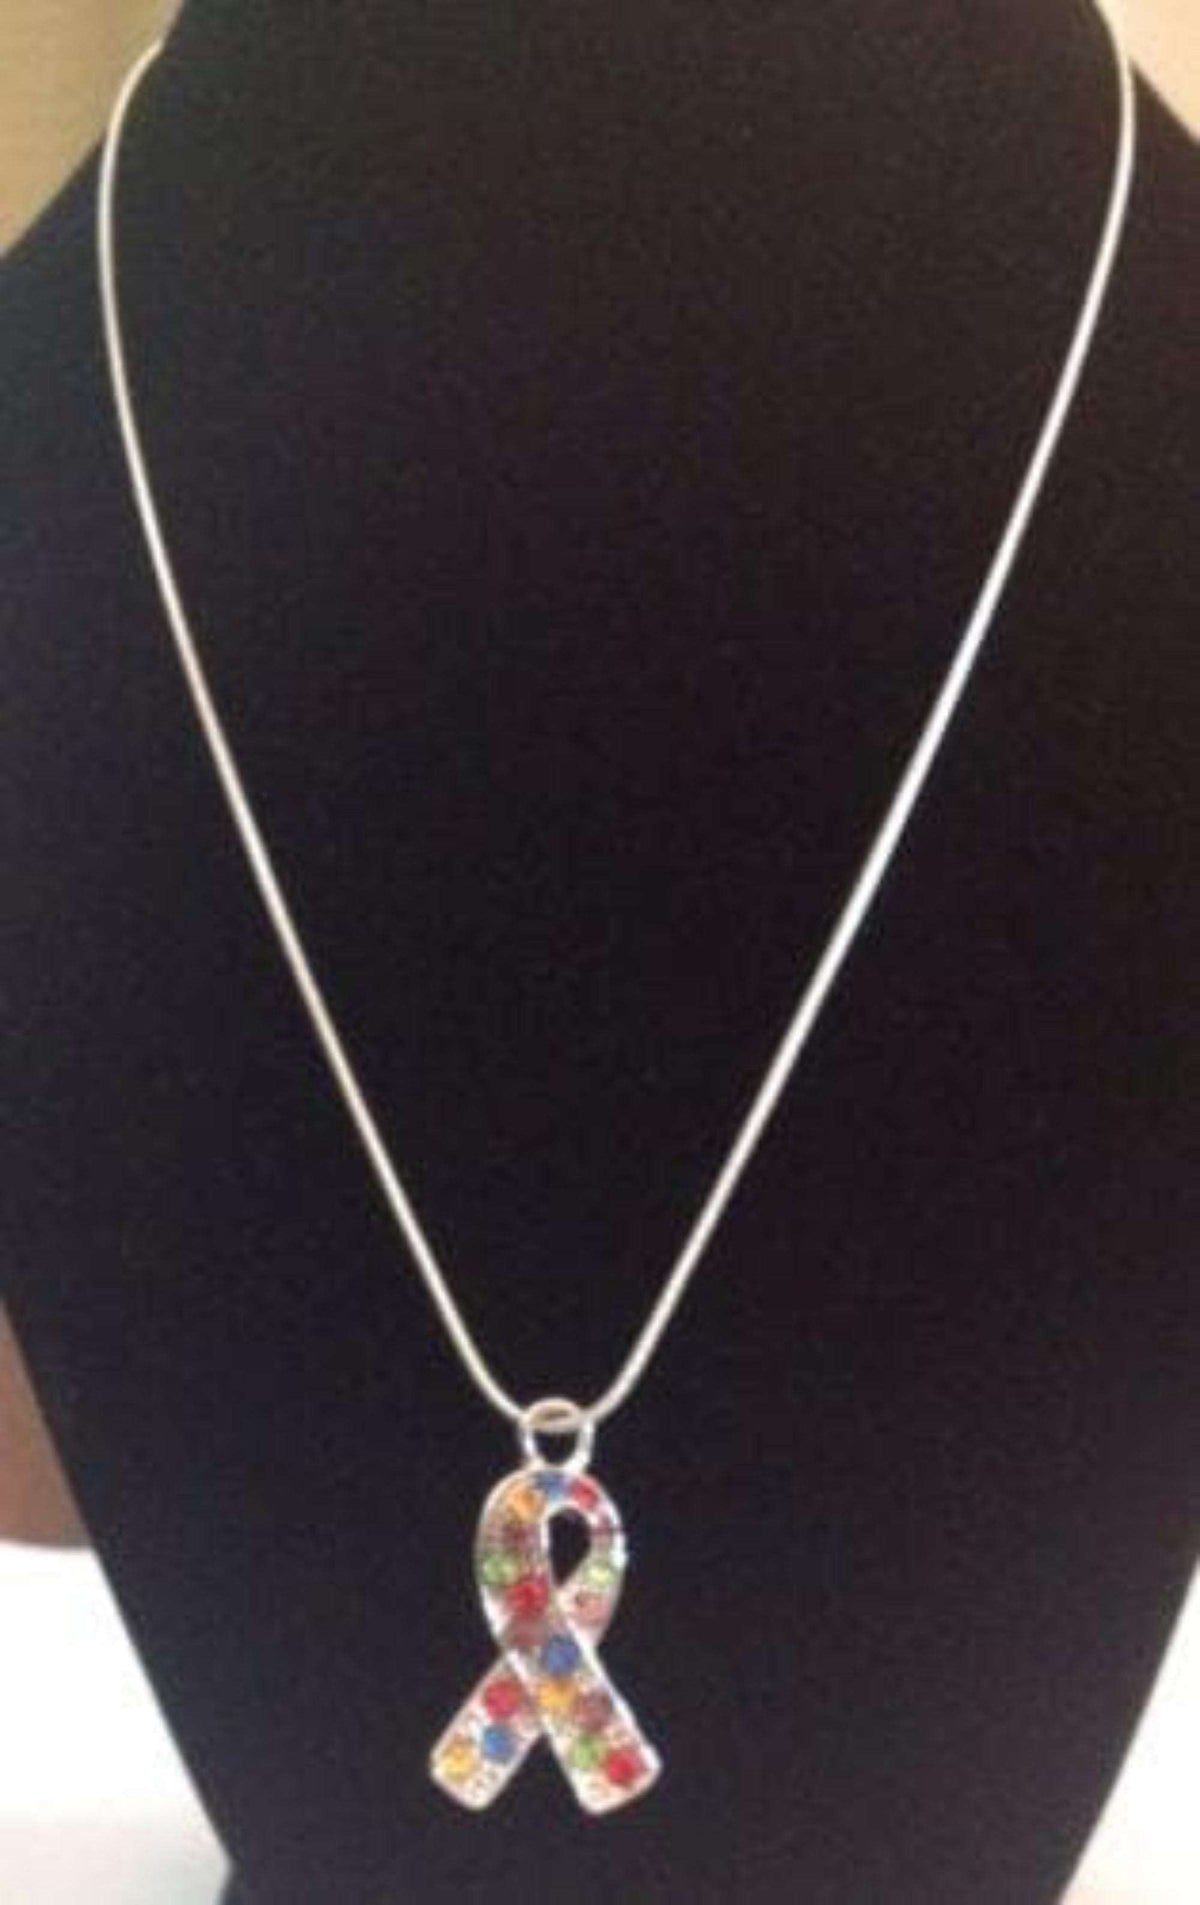 Autism Awareness Crystal Ribbon Pendant Necklace - The House of Awareness